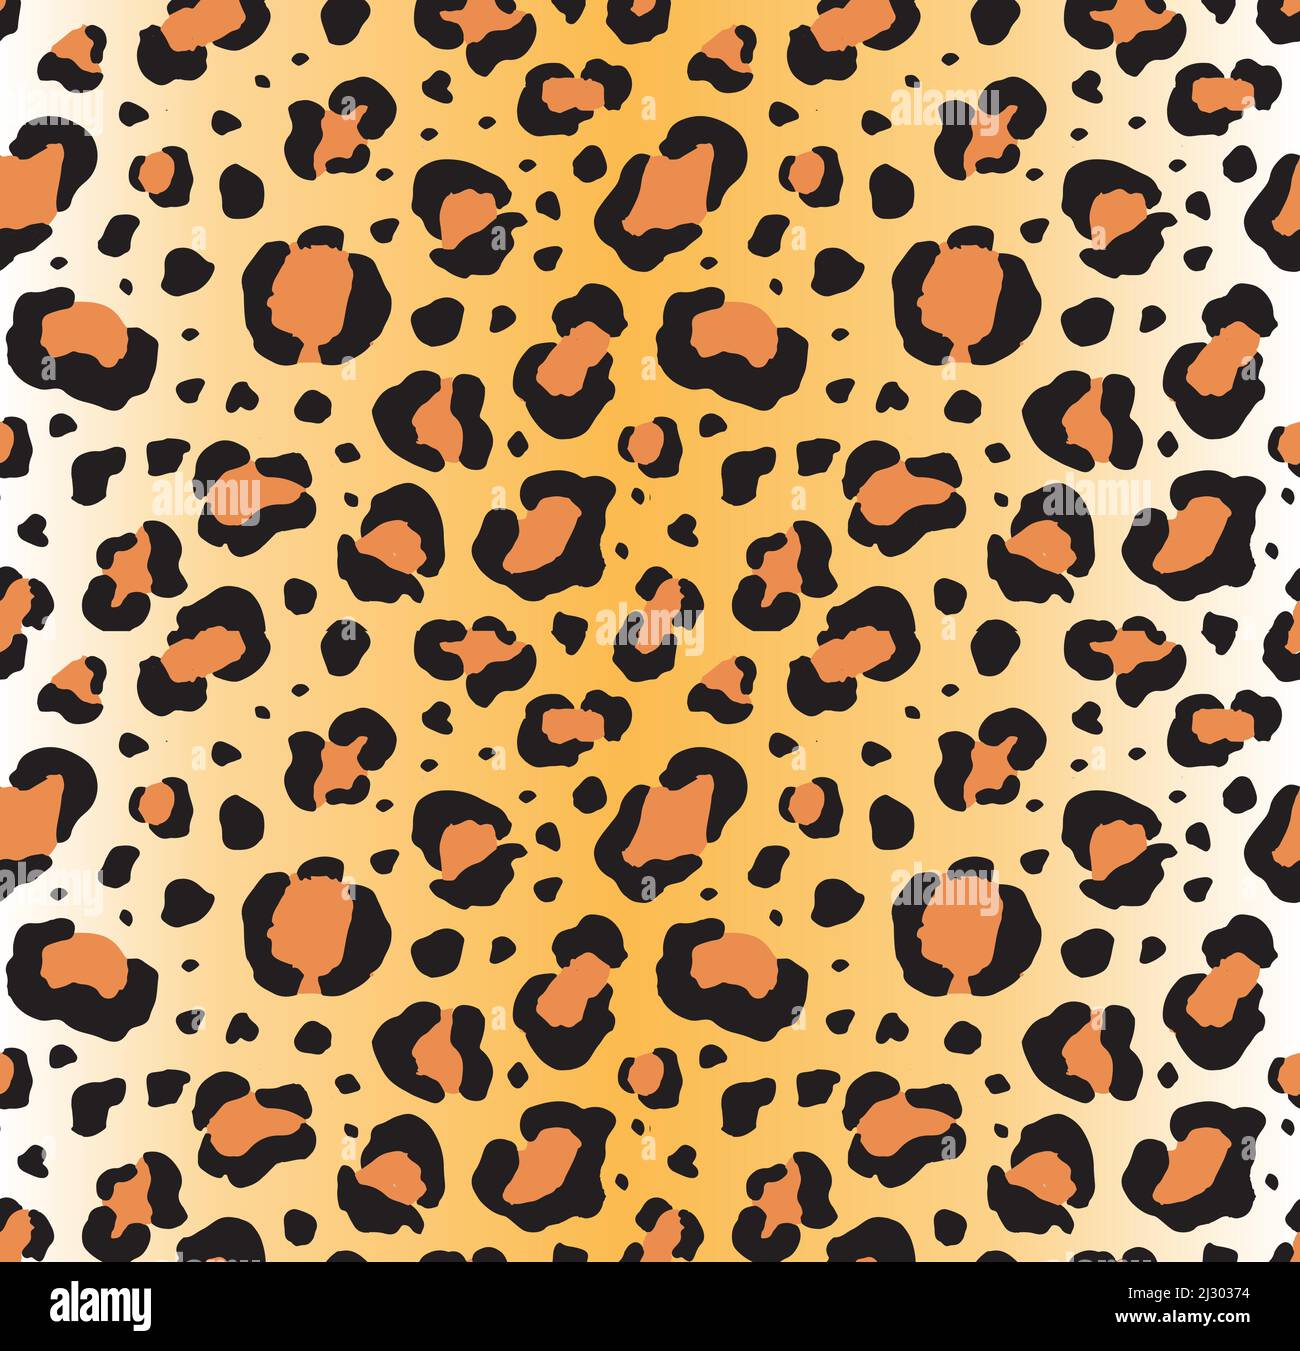 Vector seamless pattern of black leopard or yaguar dots isolated on orange yellow gradient background. Animal fur print illustration Stock Vector